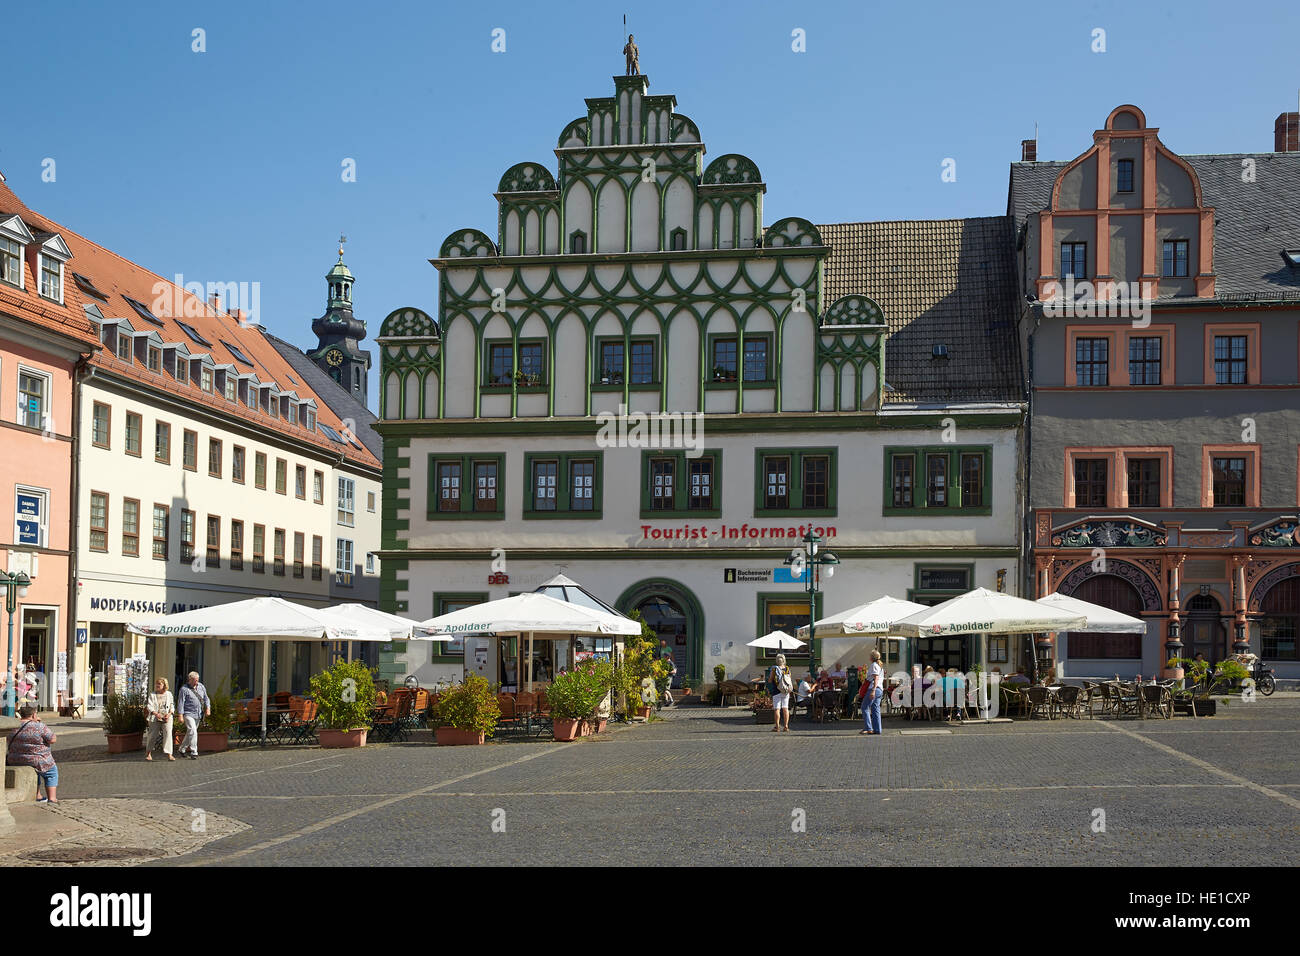 Town Hall, tourist information center at marketplace, Weimar, Thuringia, Germany Stock Photo